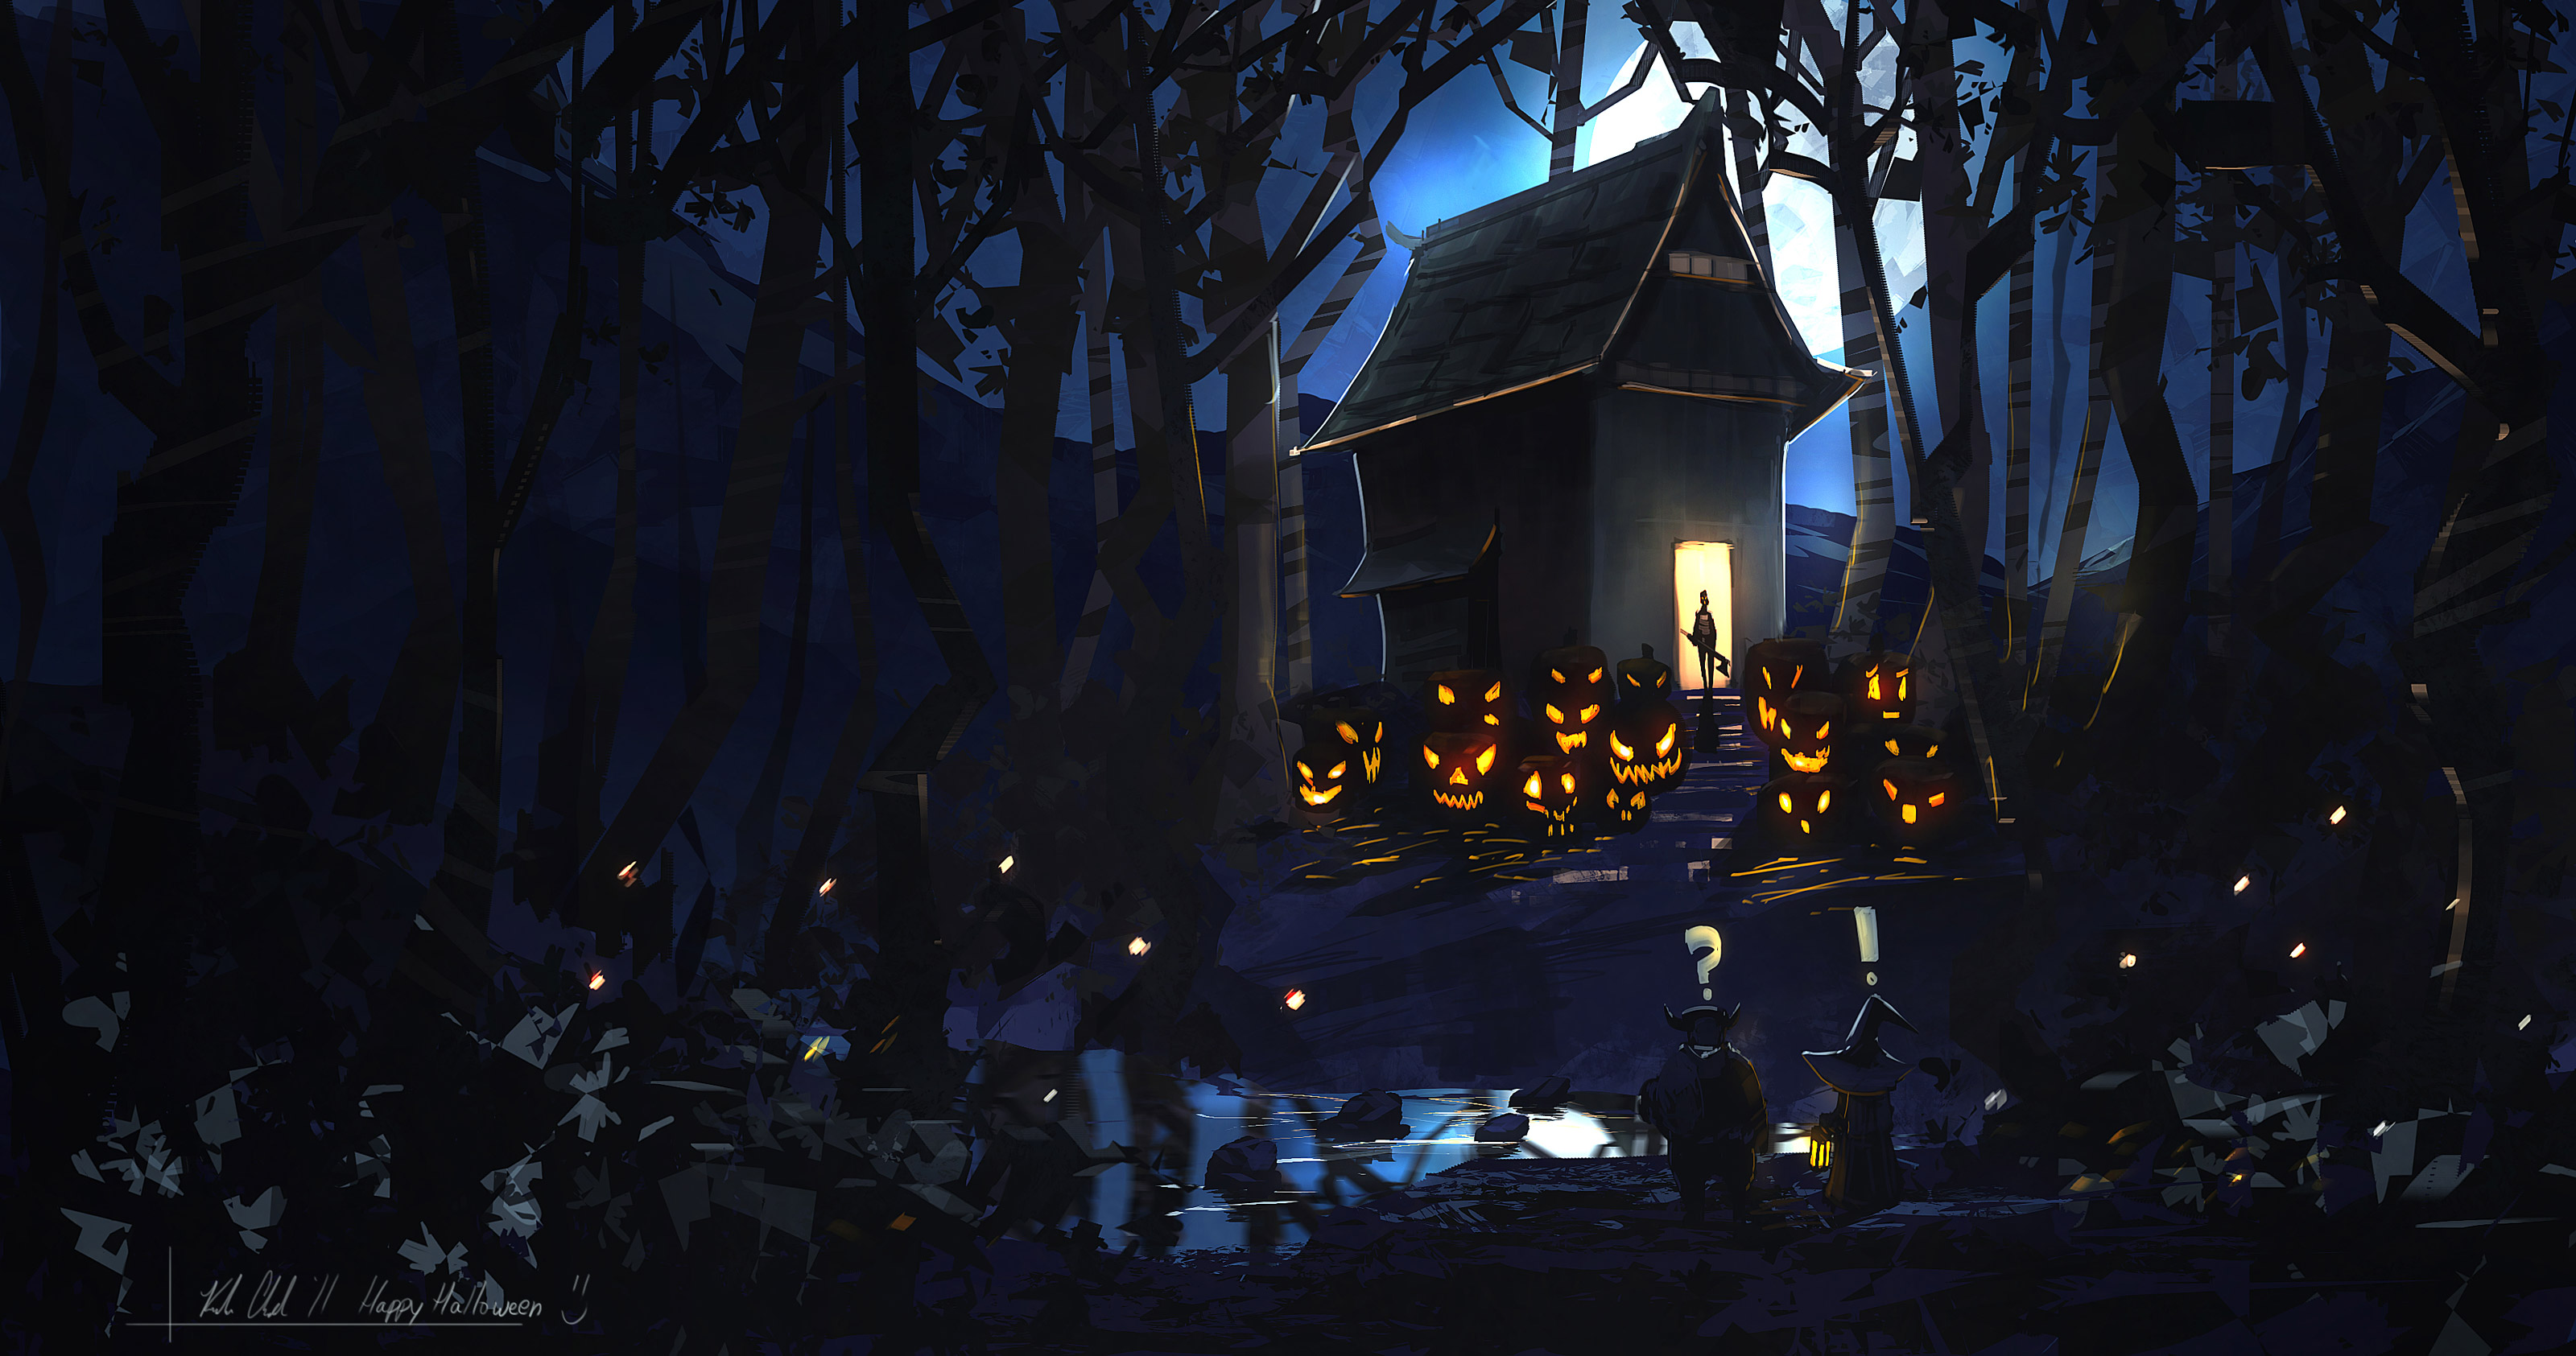 Scary Halloween Background Amp Wallpaper Collection